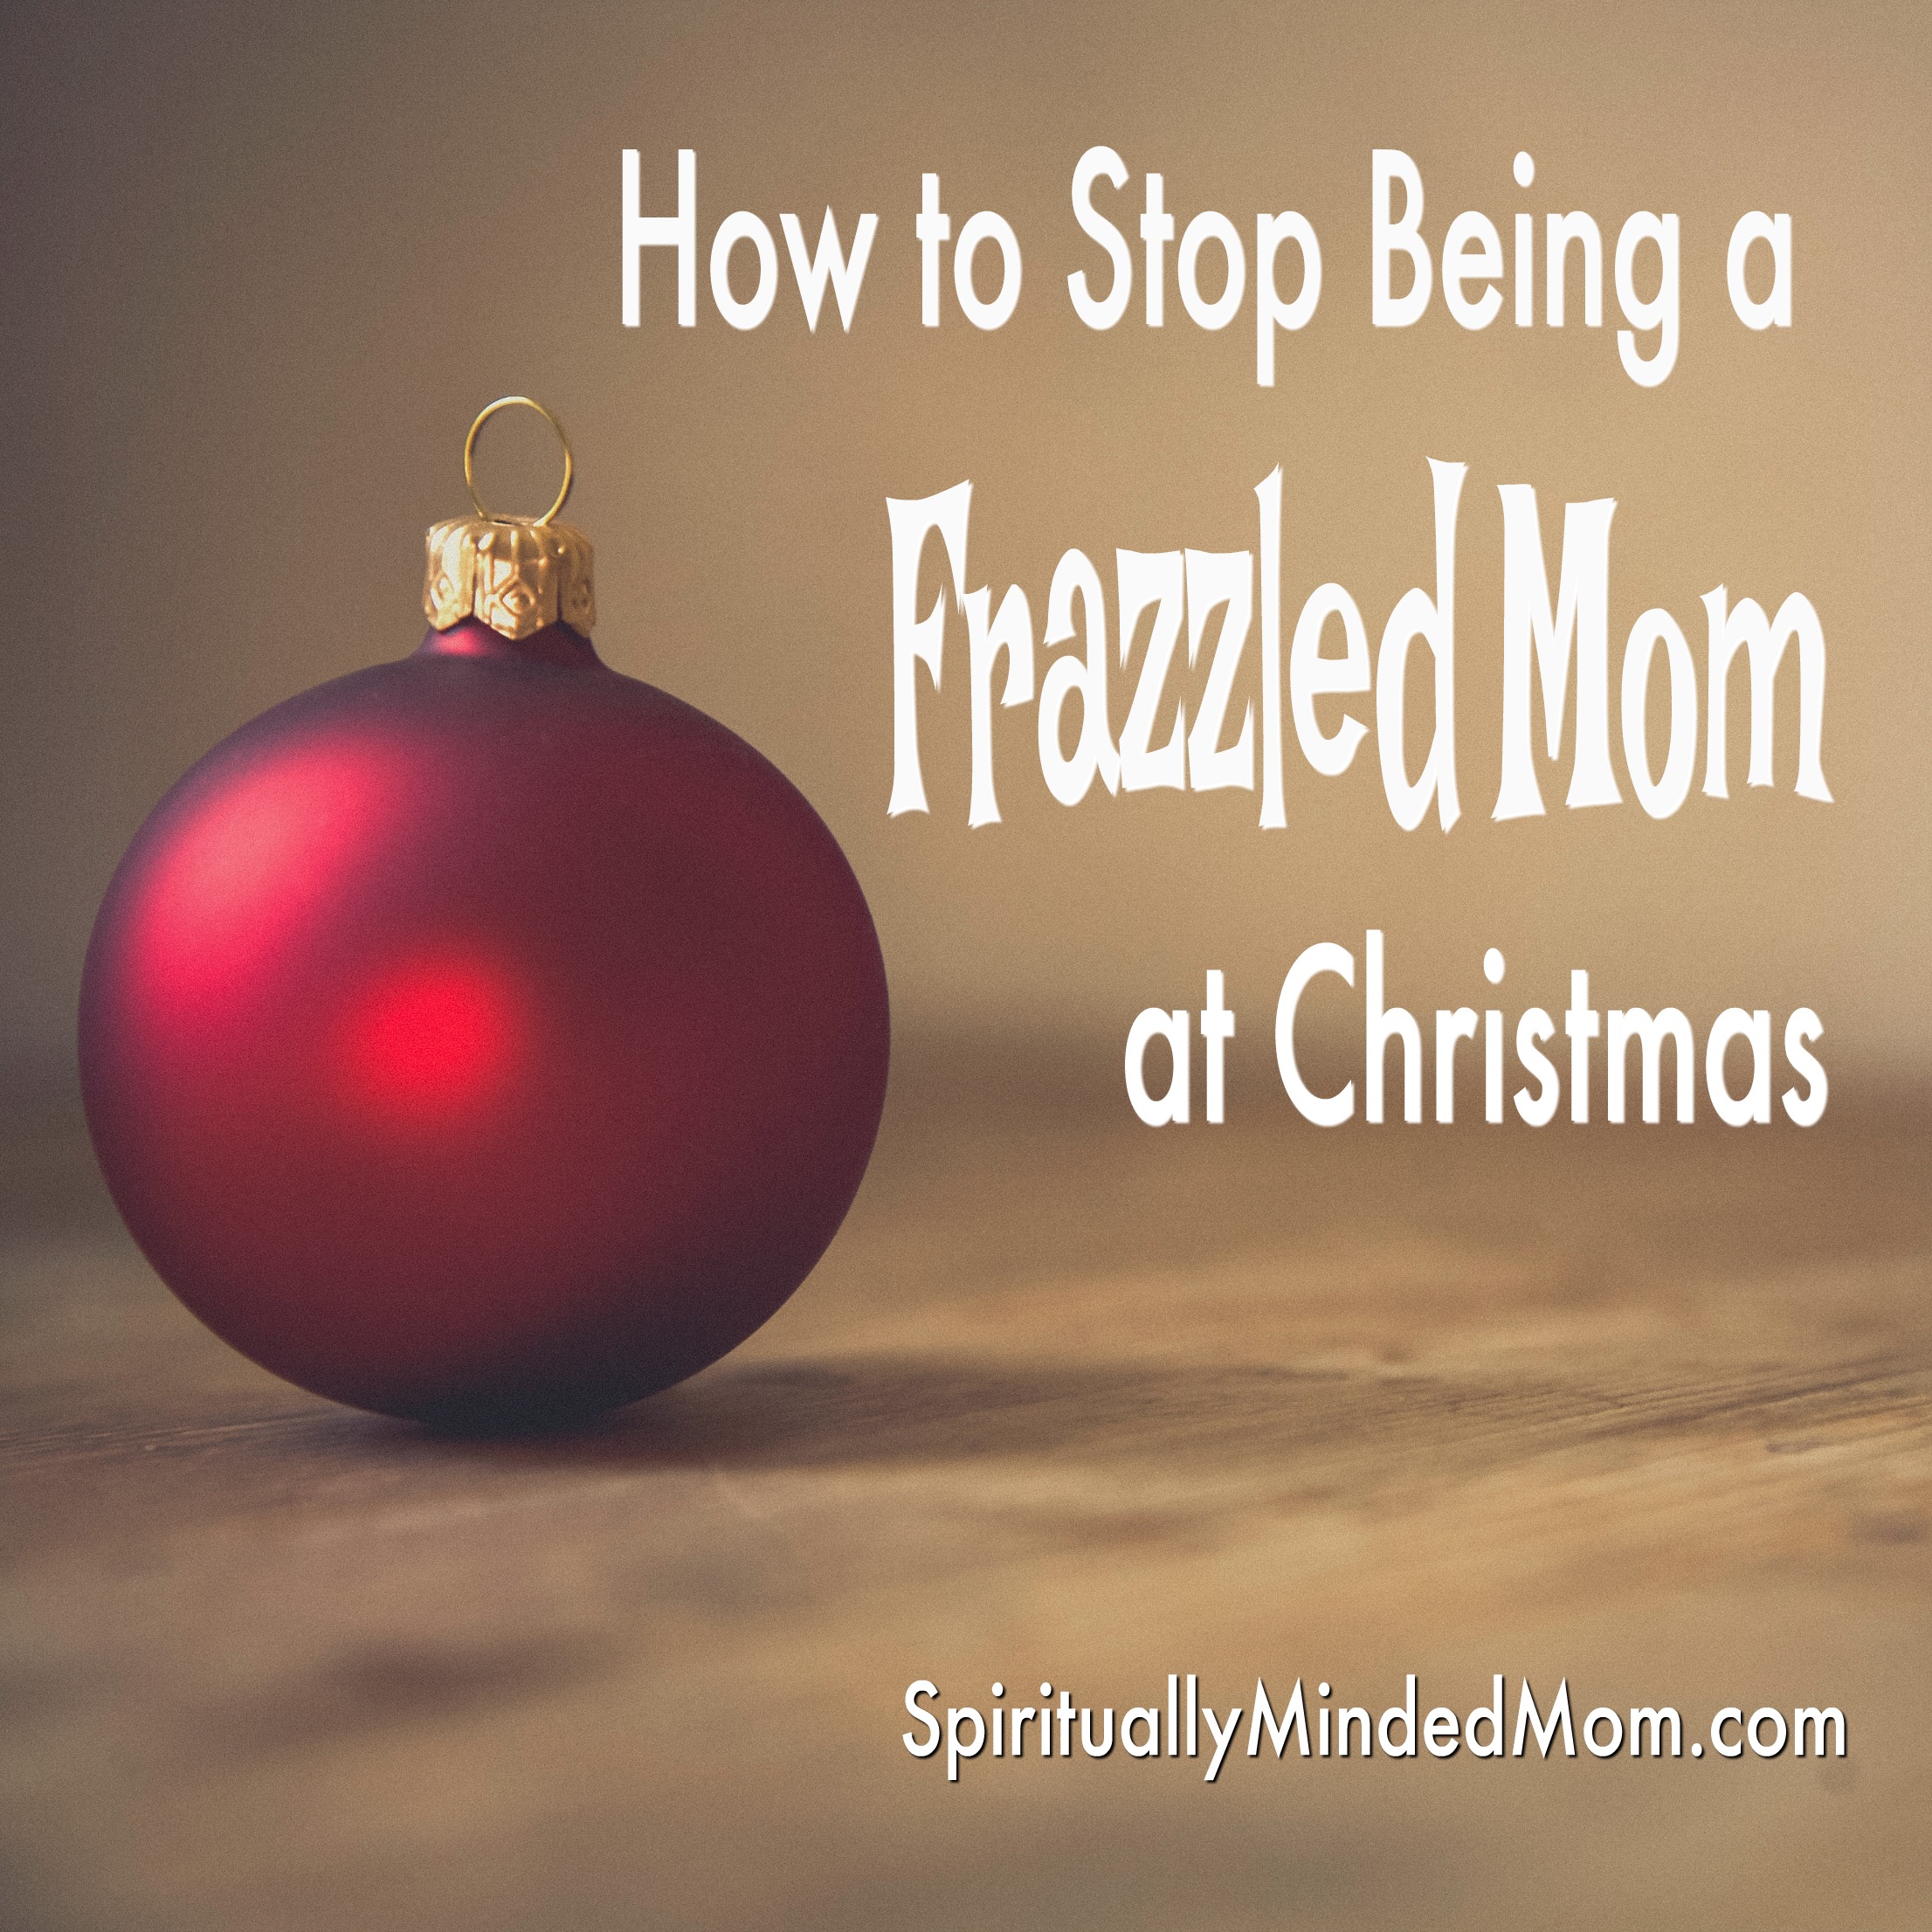 How to Stop Being a Frazzled Mom at Christmas